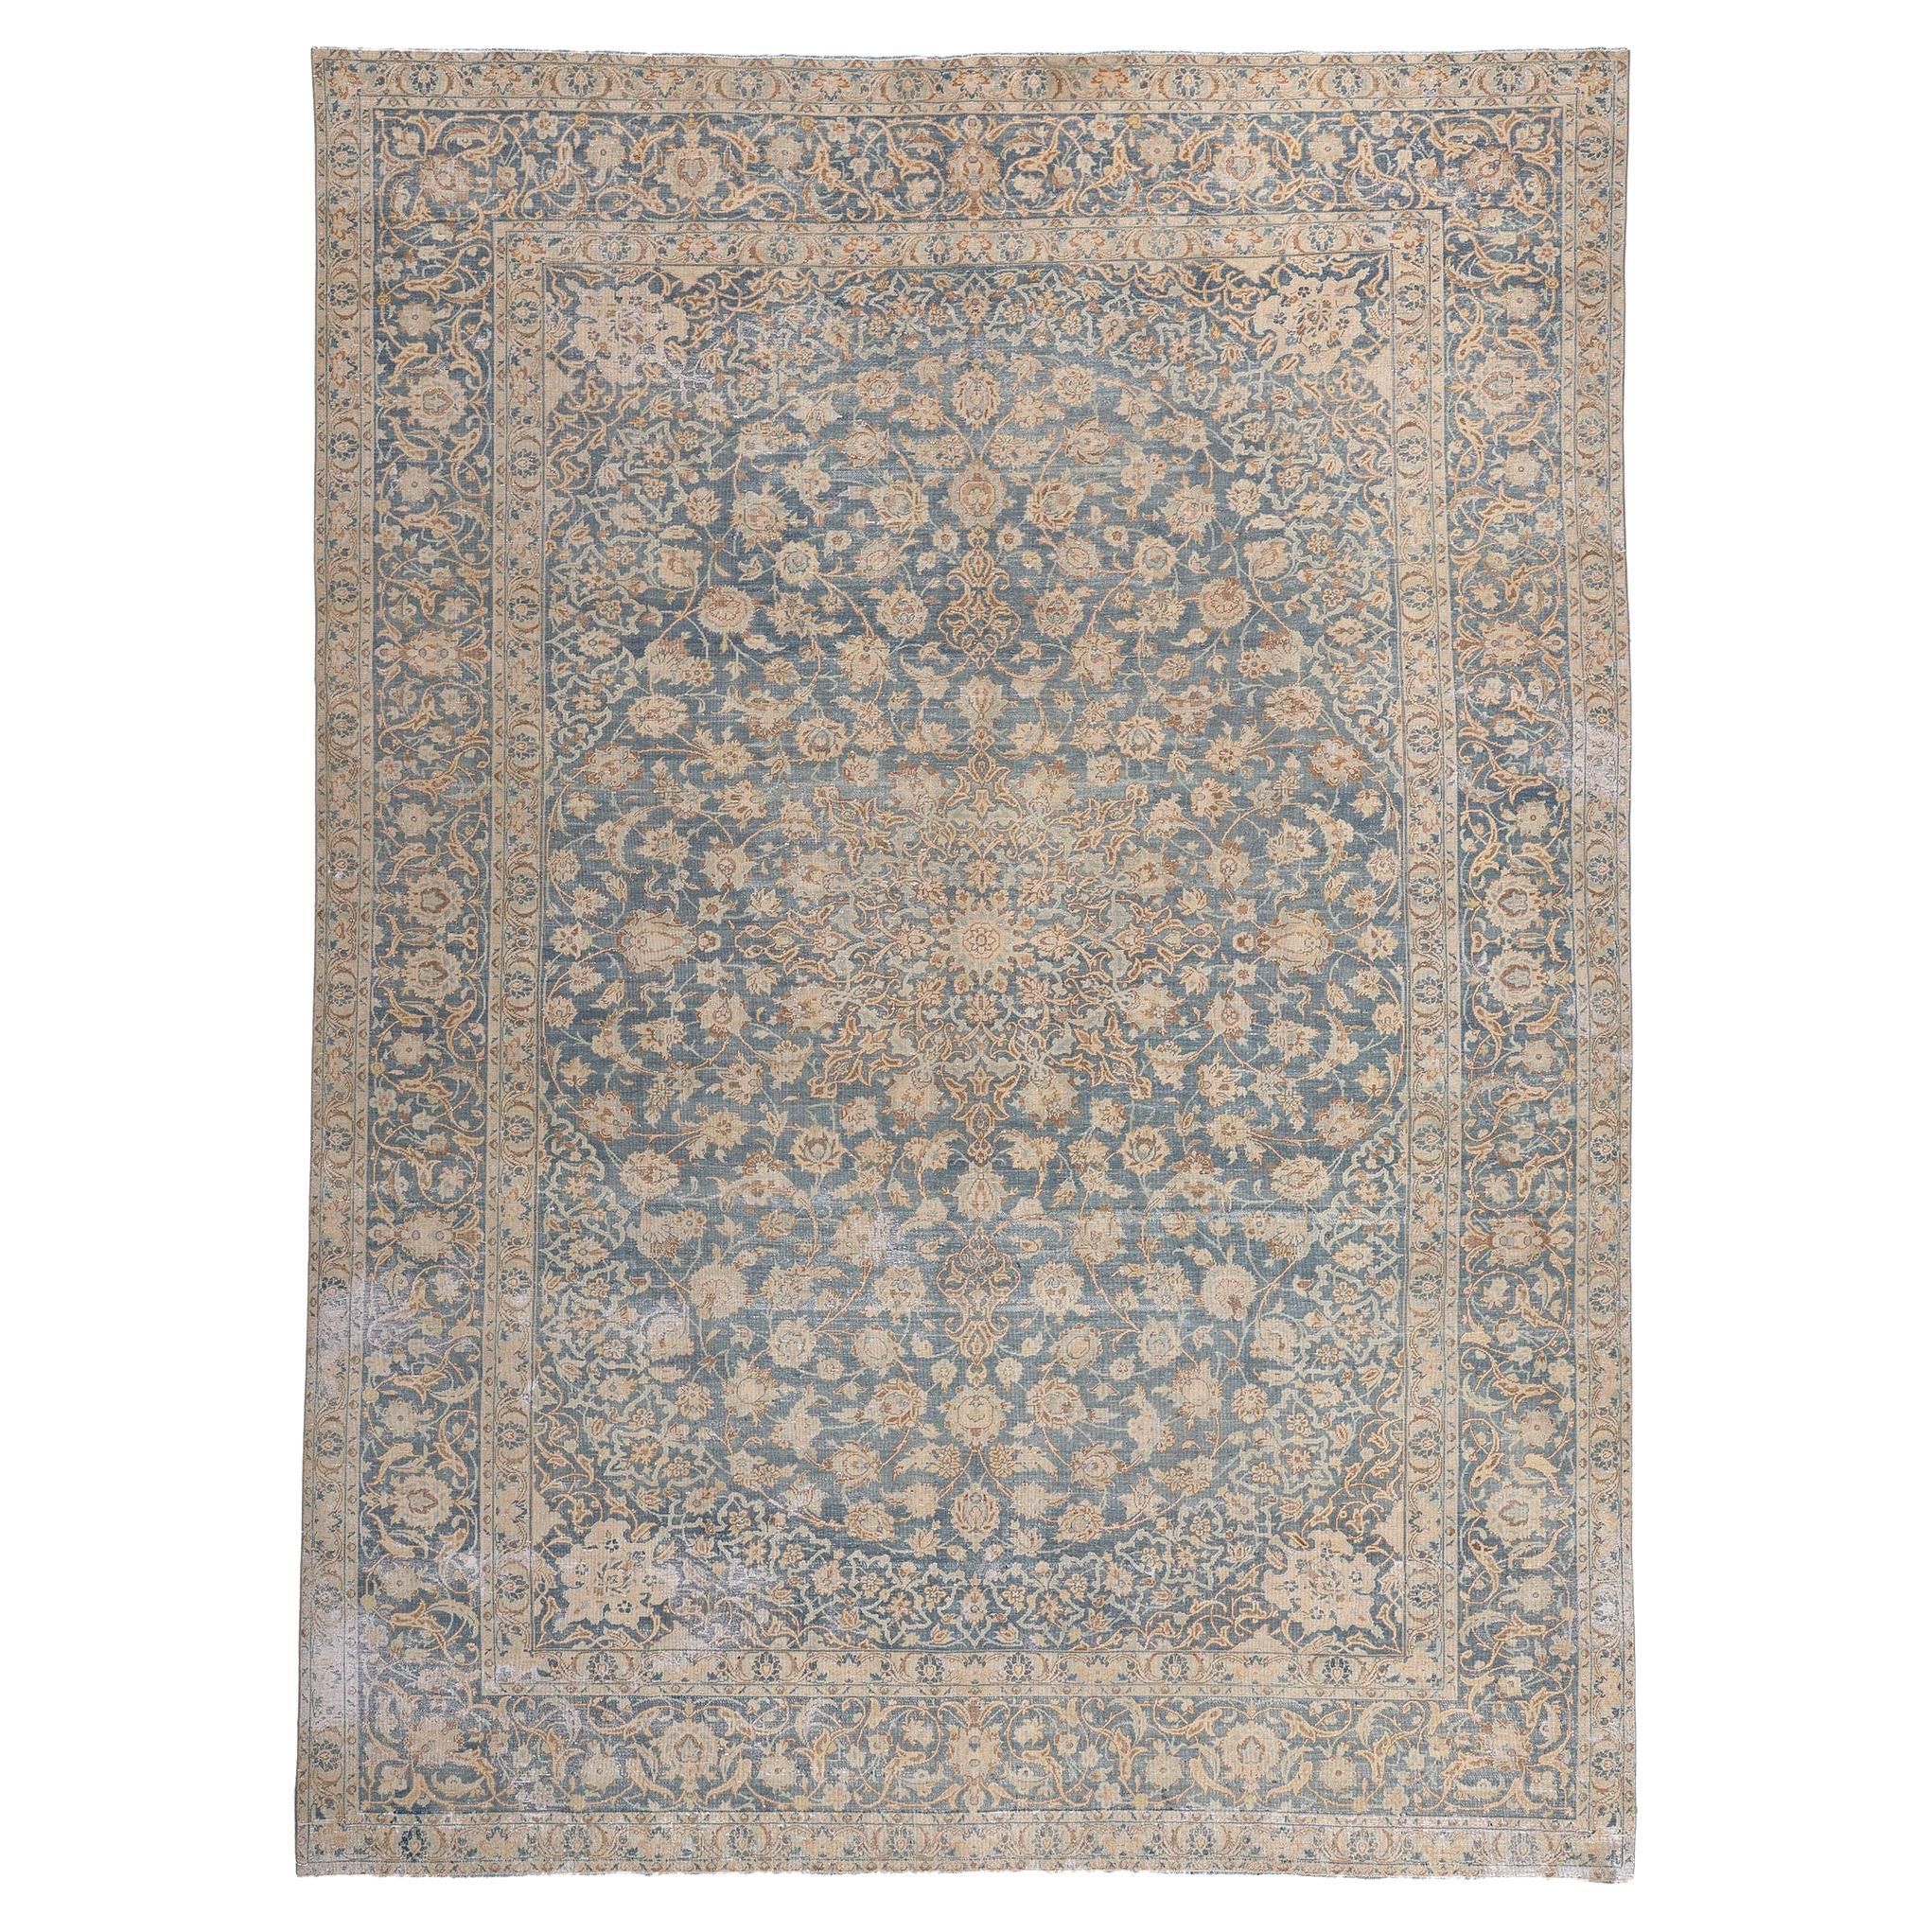 Distressed Antique Persian Tabriz Rug, Faded Soft Earth-Tone Colors For Sale